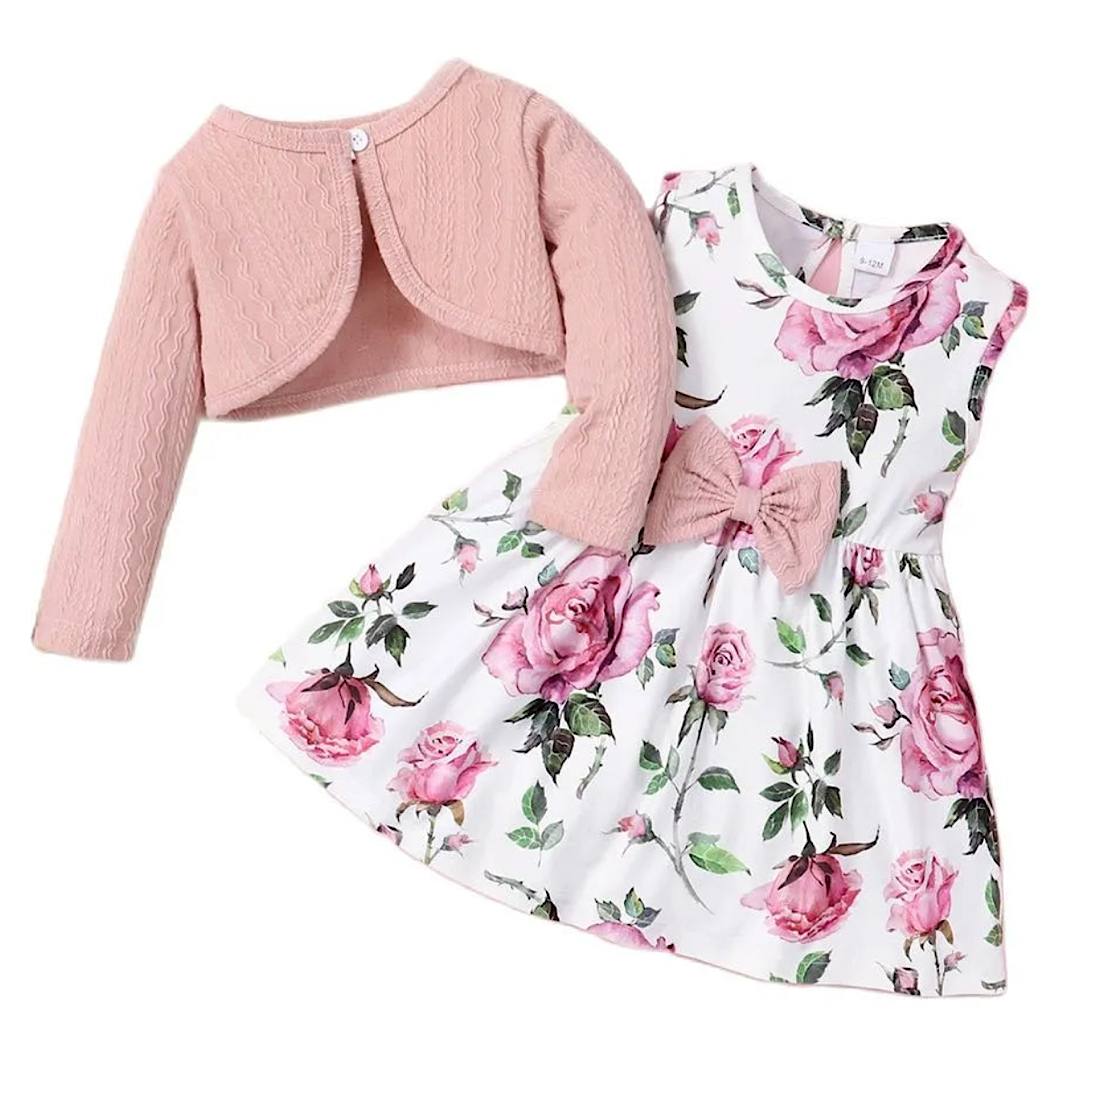 Baby and Toddler Girl Cotton Dress Set Pink Cardigan and Floral Dress, Color